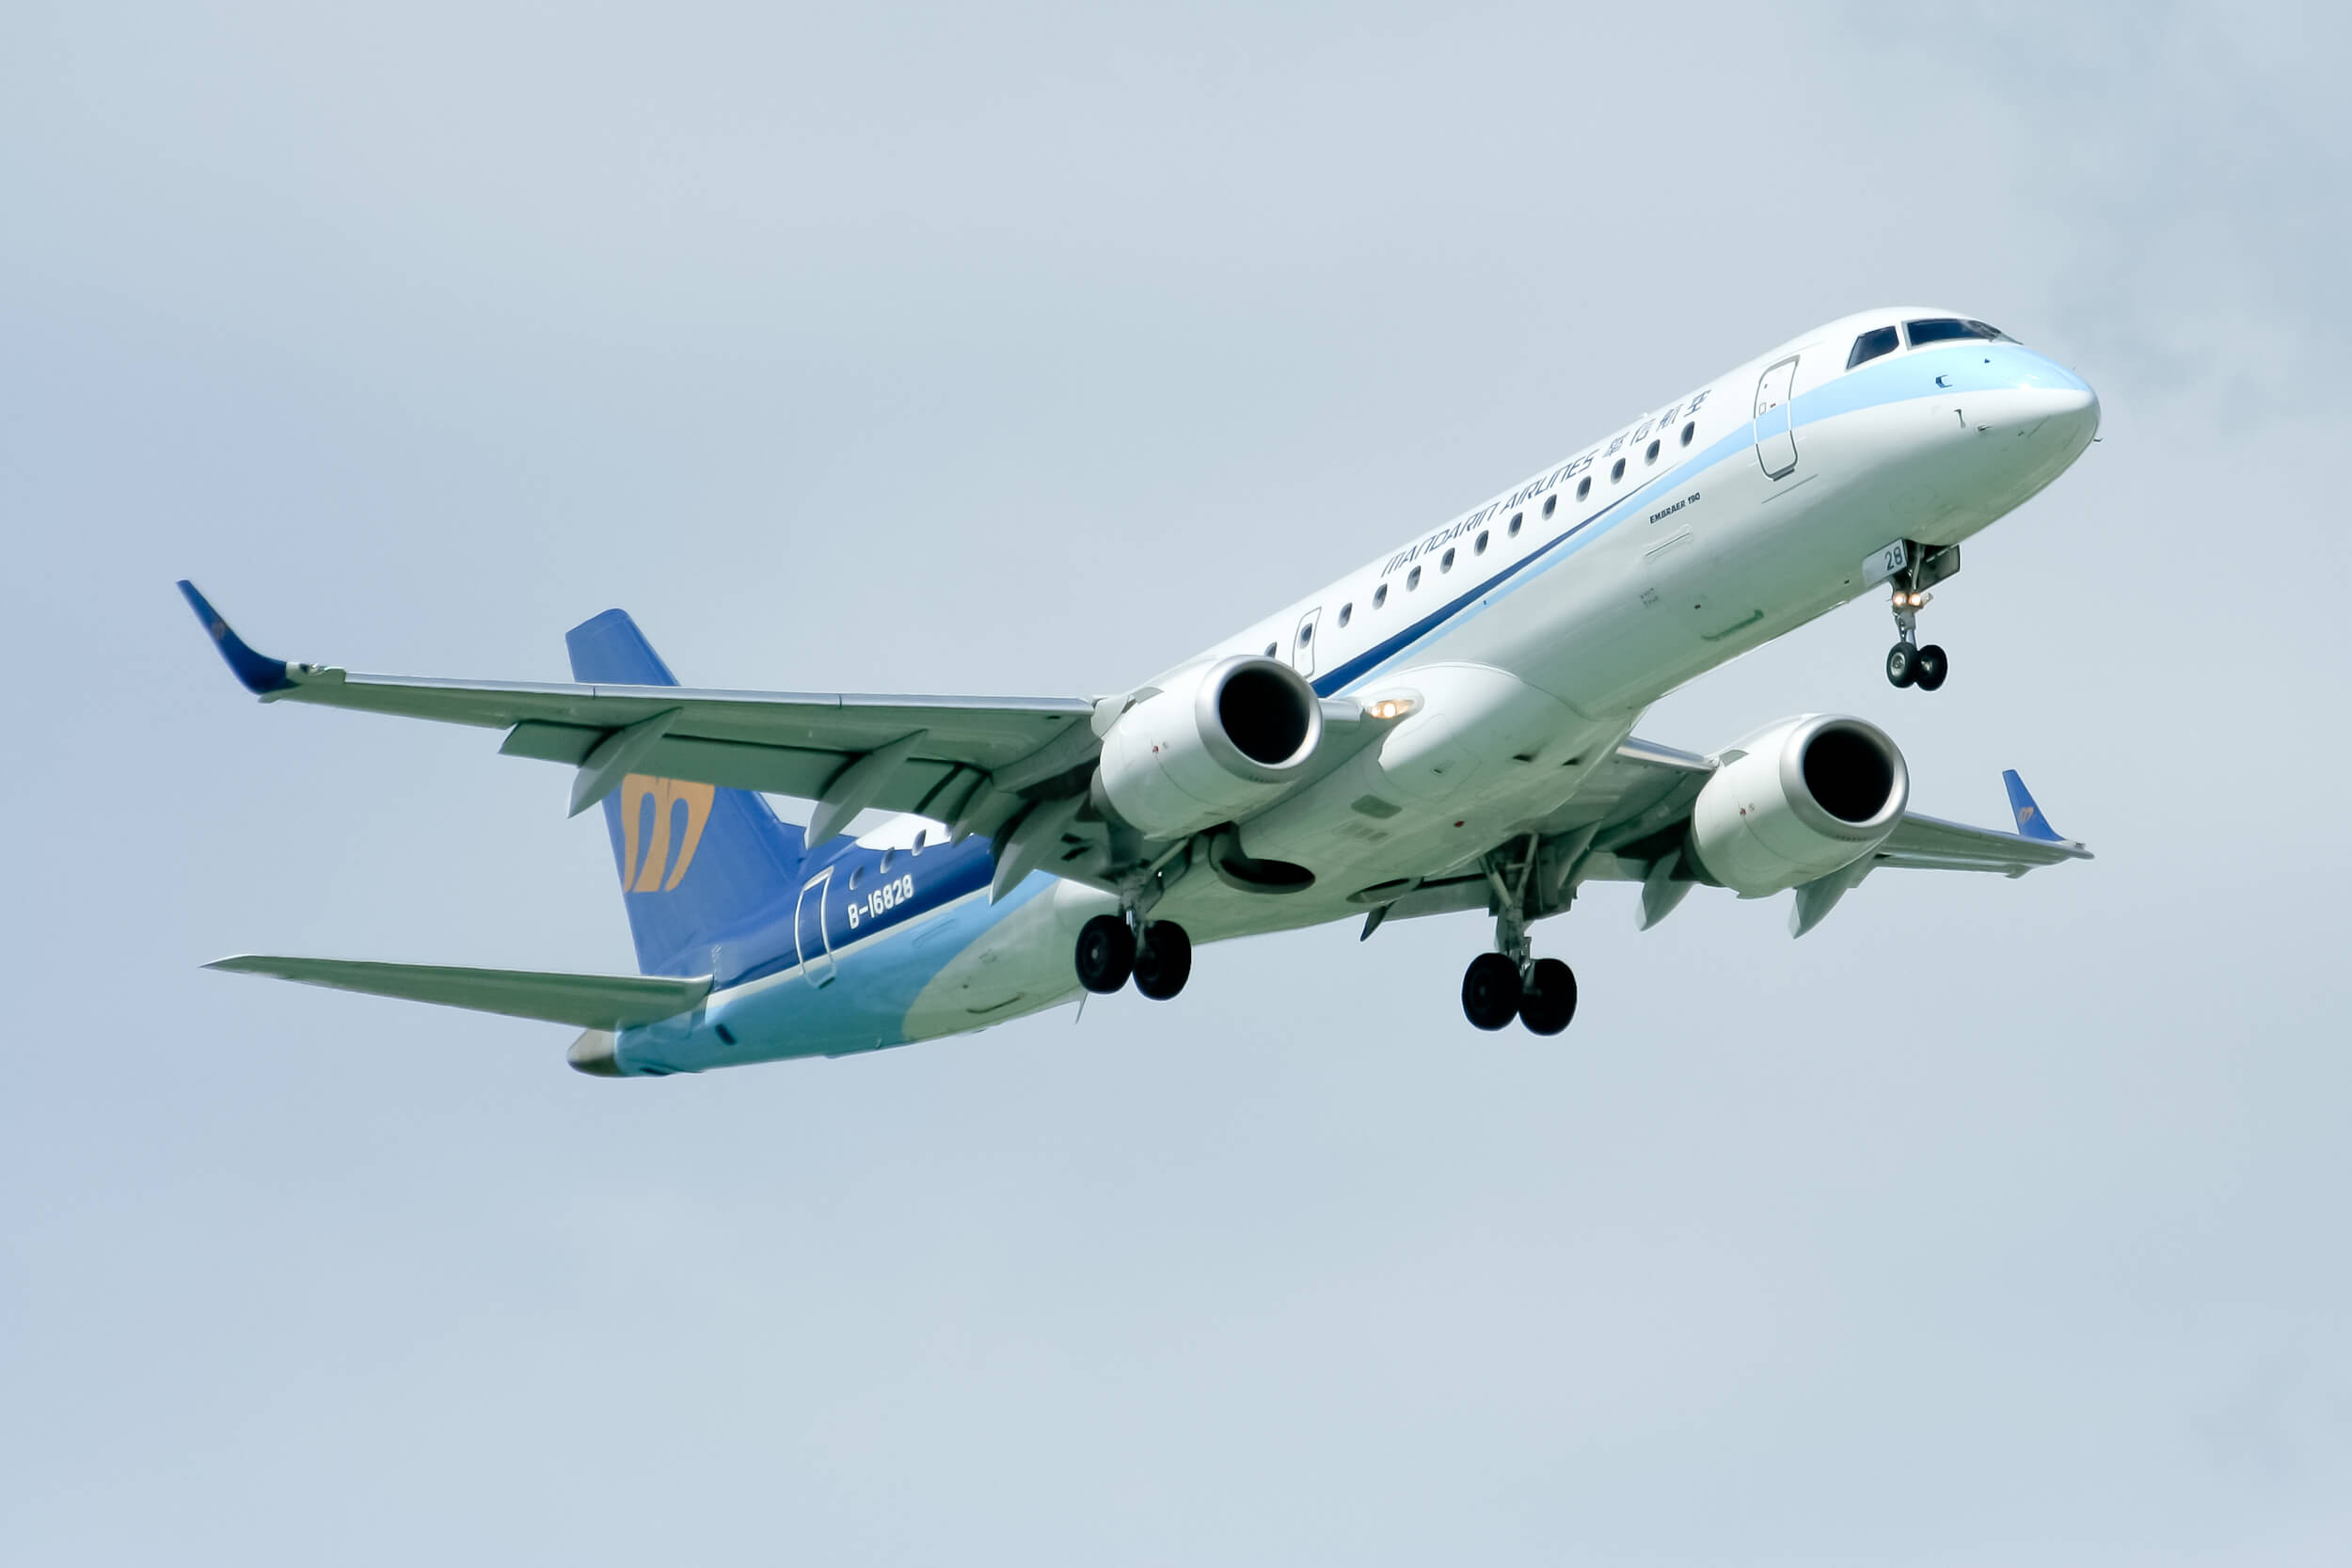 TrueNoord purchases two E190s from GECAS operated by Mandarin Airlines